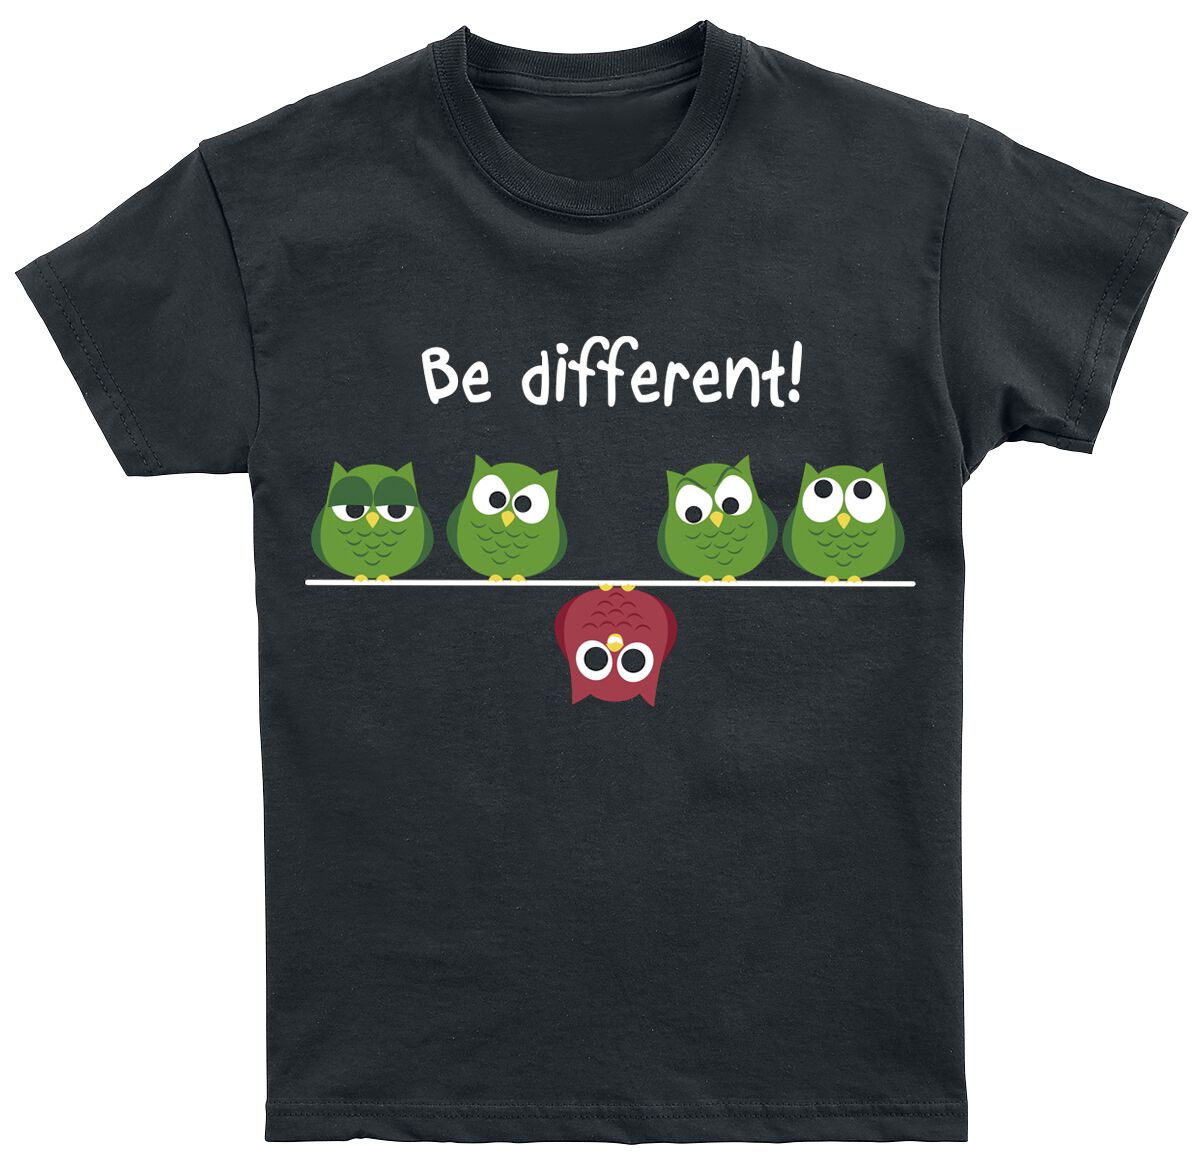 Be Different! Kids - Be Different! T-Shirt schwarz in 152